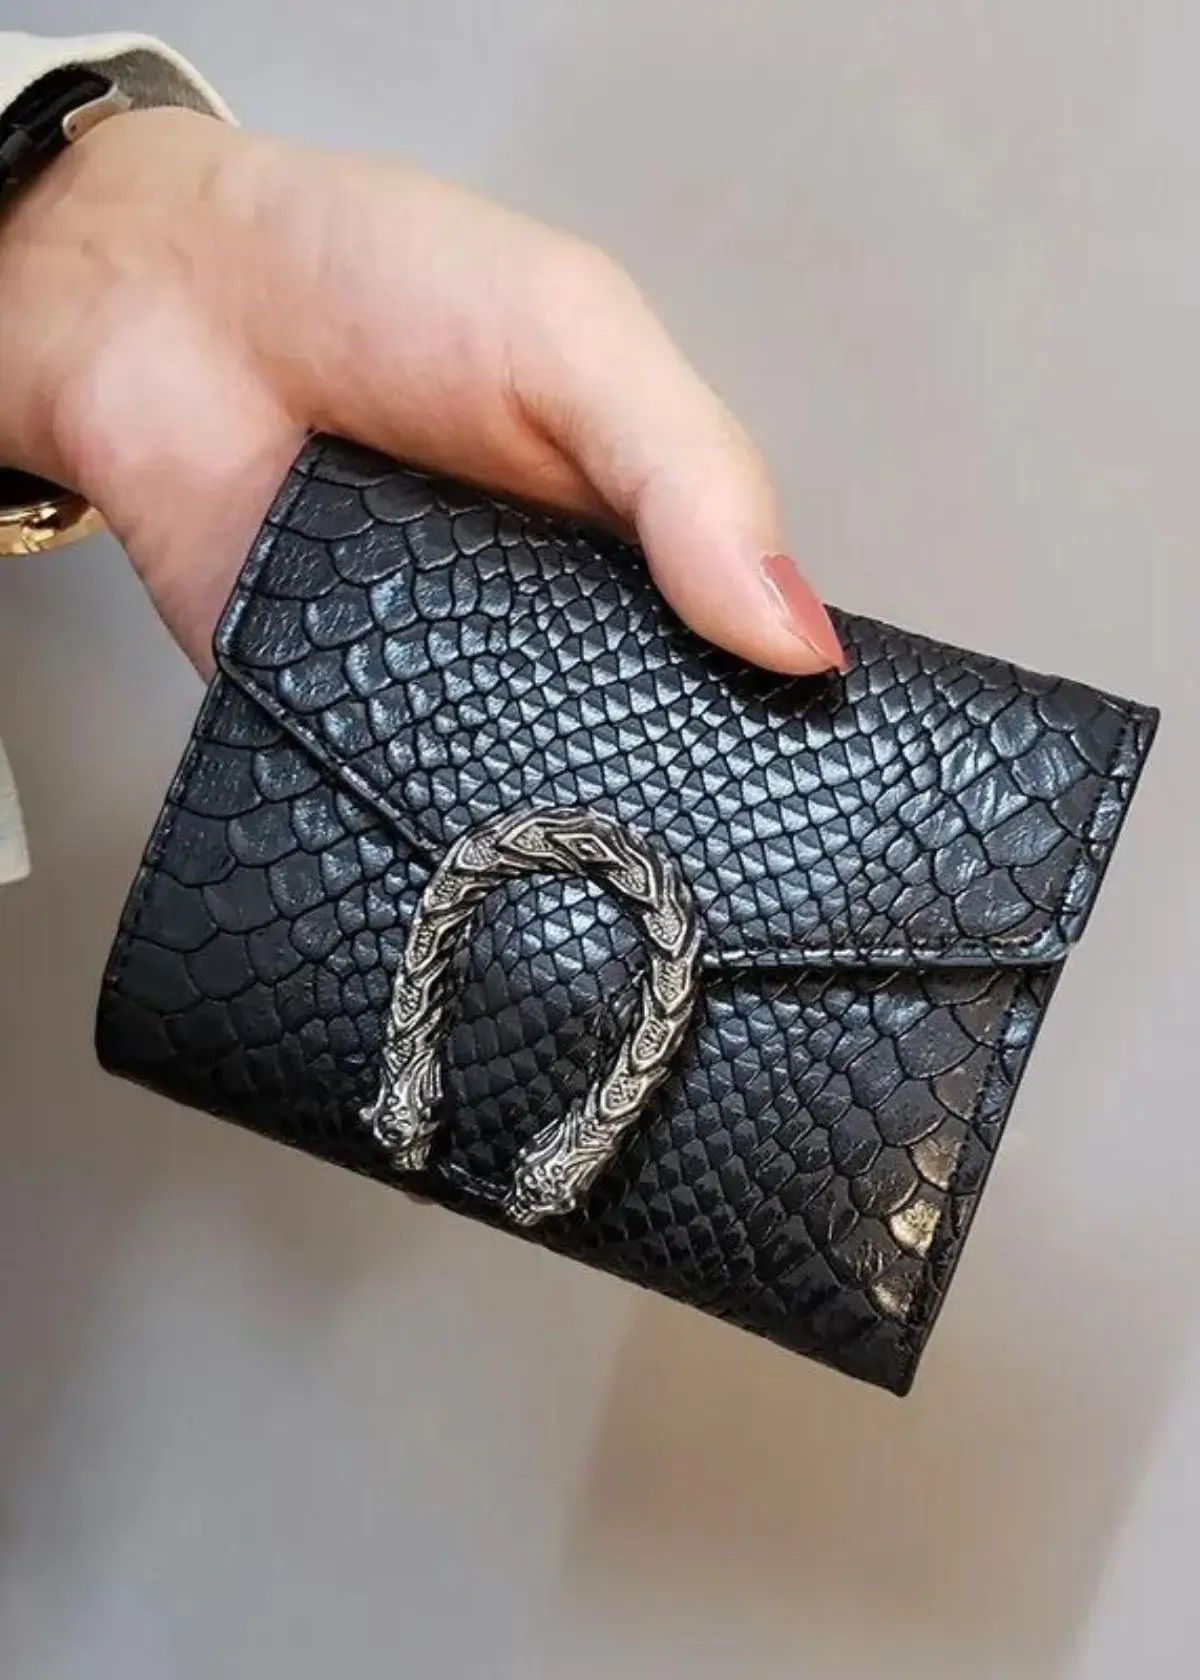 Can Snake Skin Wallets be Customized?